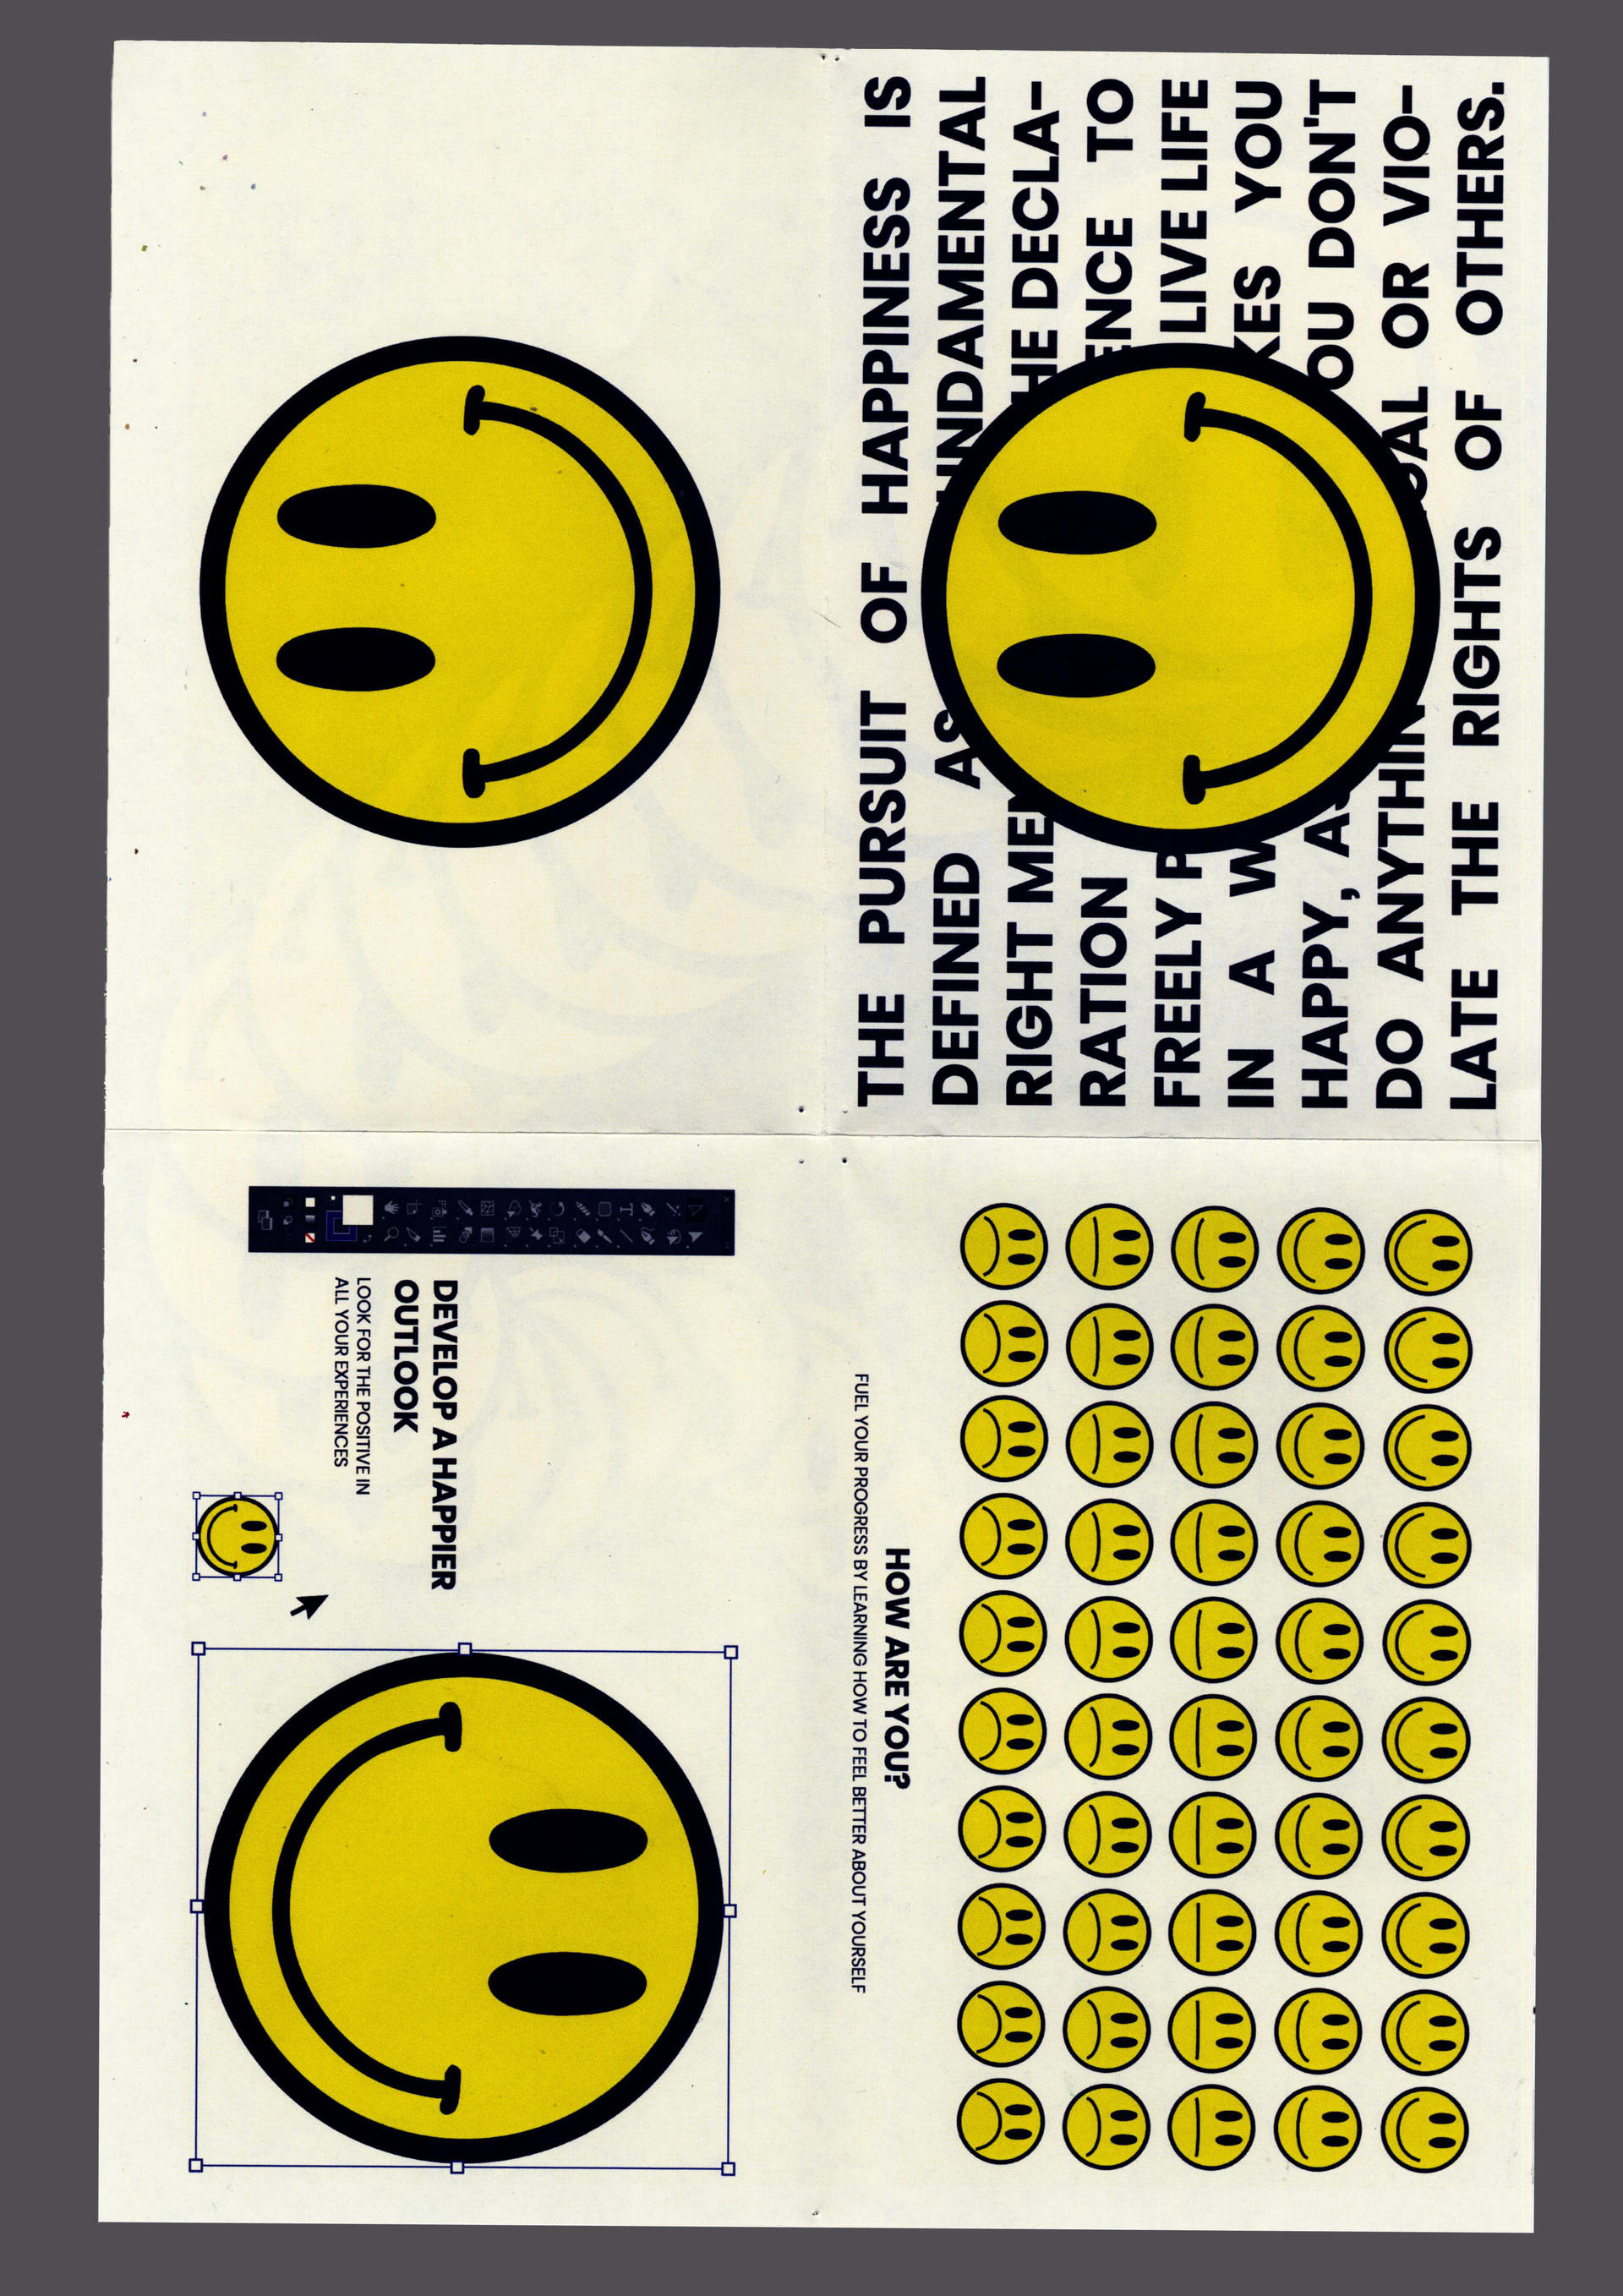 11 x 17 poster with smiley face graphics and text